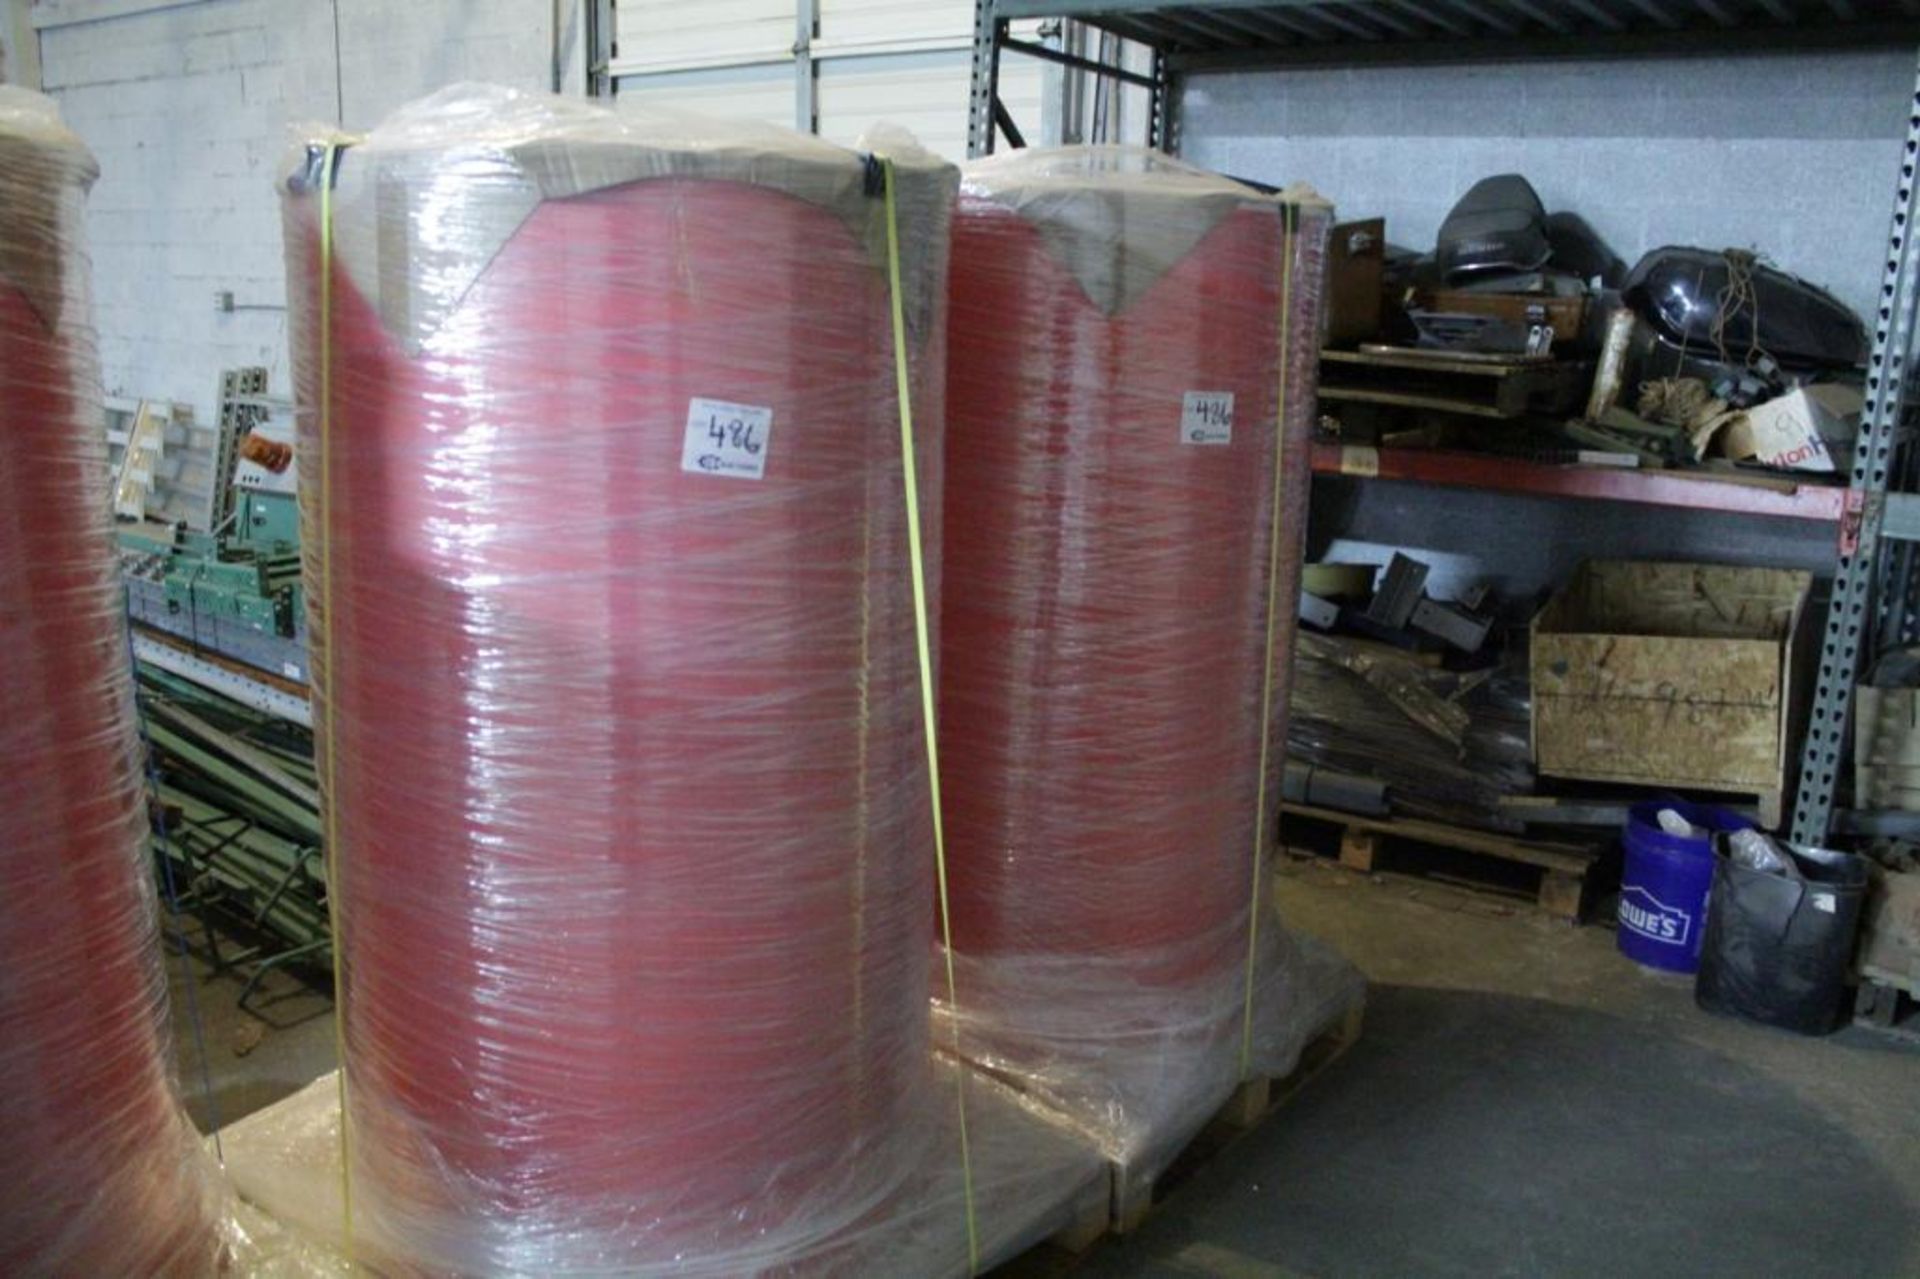 Rolls of absorbent material